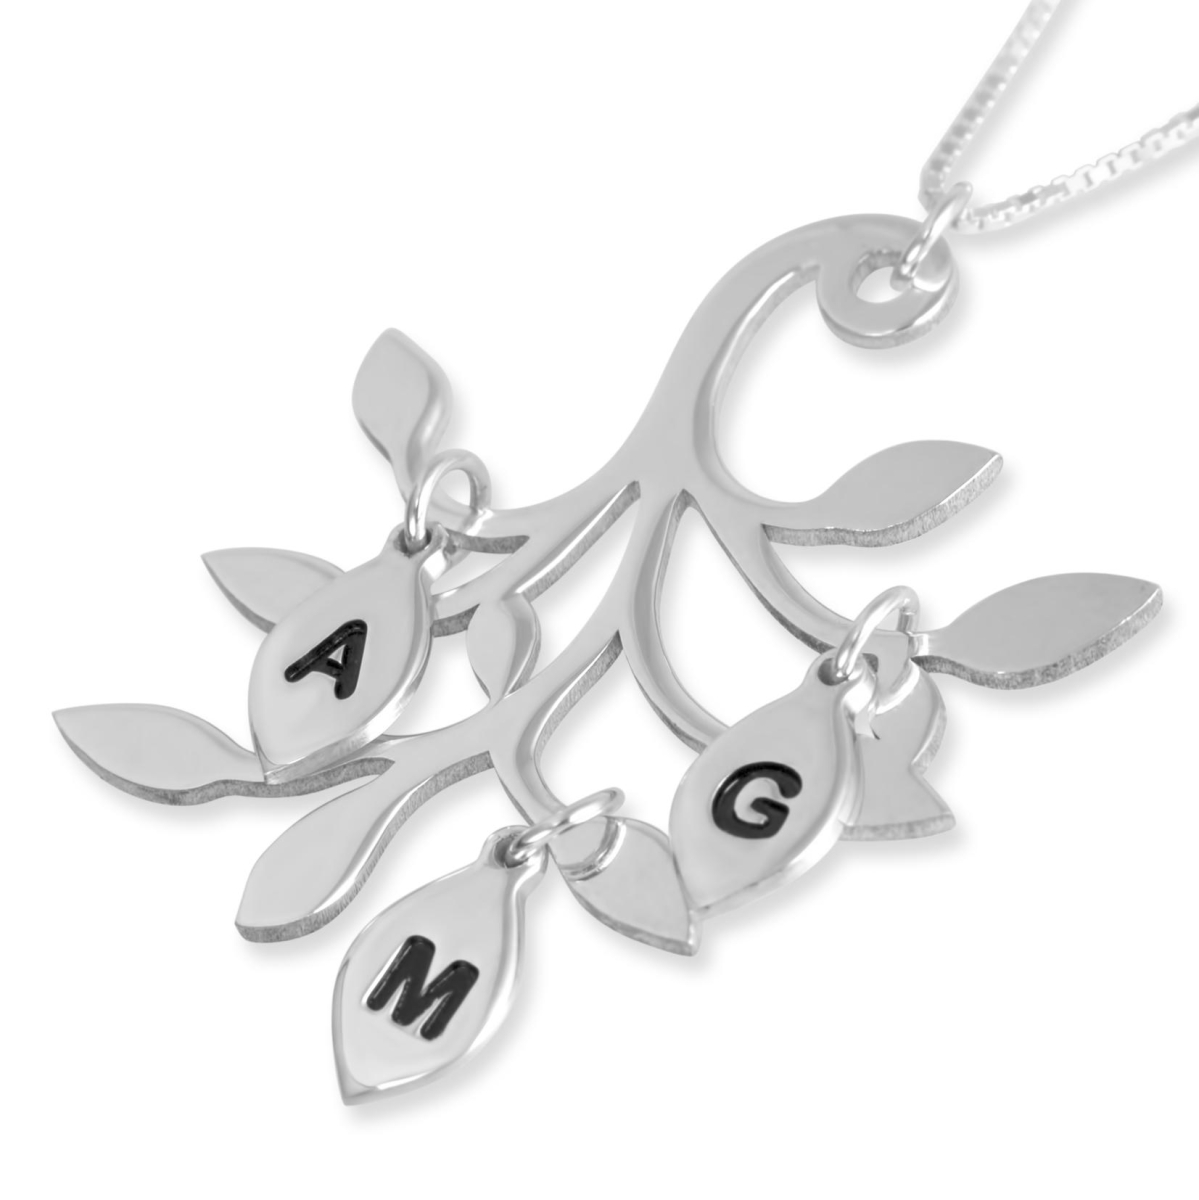 Monogram Necklace Woman Personalized Engraved Monogram Initial Jewelry  Stainless Steel Initial Pendant Mother Gift Personalized Gift For Her